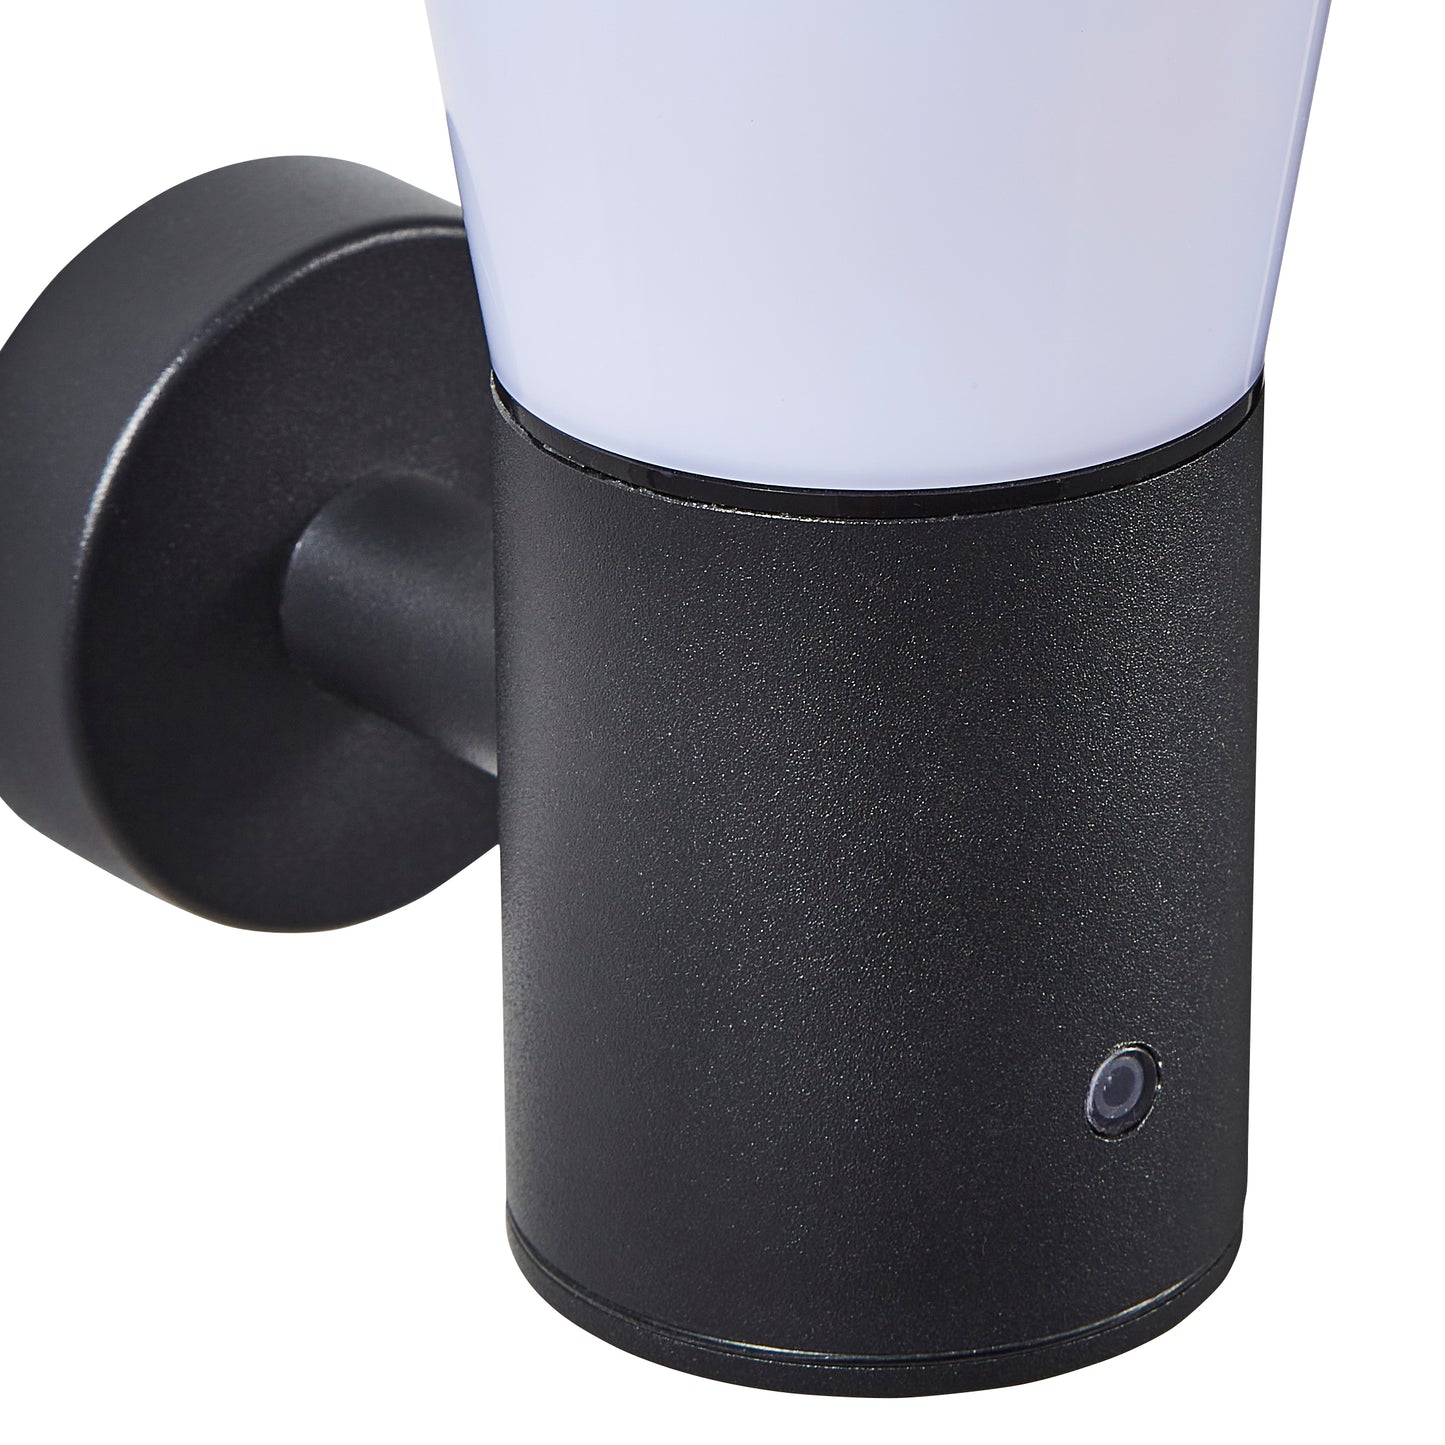 Our OTIS black wall mounted up or down outdoor light with built in dusk till door photo cell sensor would look perfect in a modern or more traditional home design. Outside wall lights can provide atmospheric light in your garden, at the front door or on the terrace as well as a great security solution. It is designed for durability and longevity with its robust material producing a fully weatherproof and water resistant light fitting. Use LED bulbs to make this light energy efficient and low cost to run